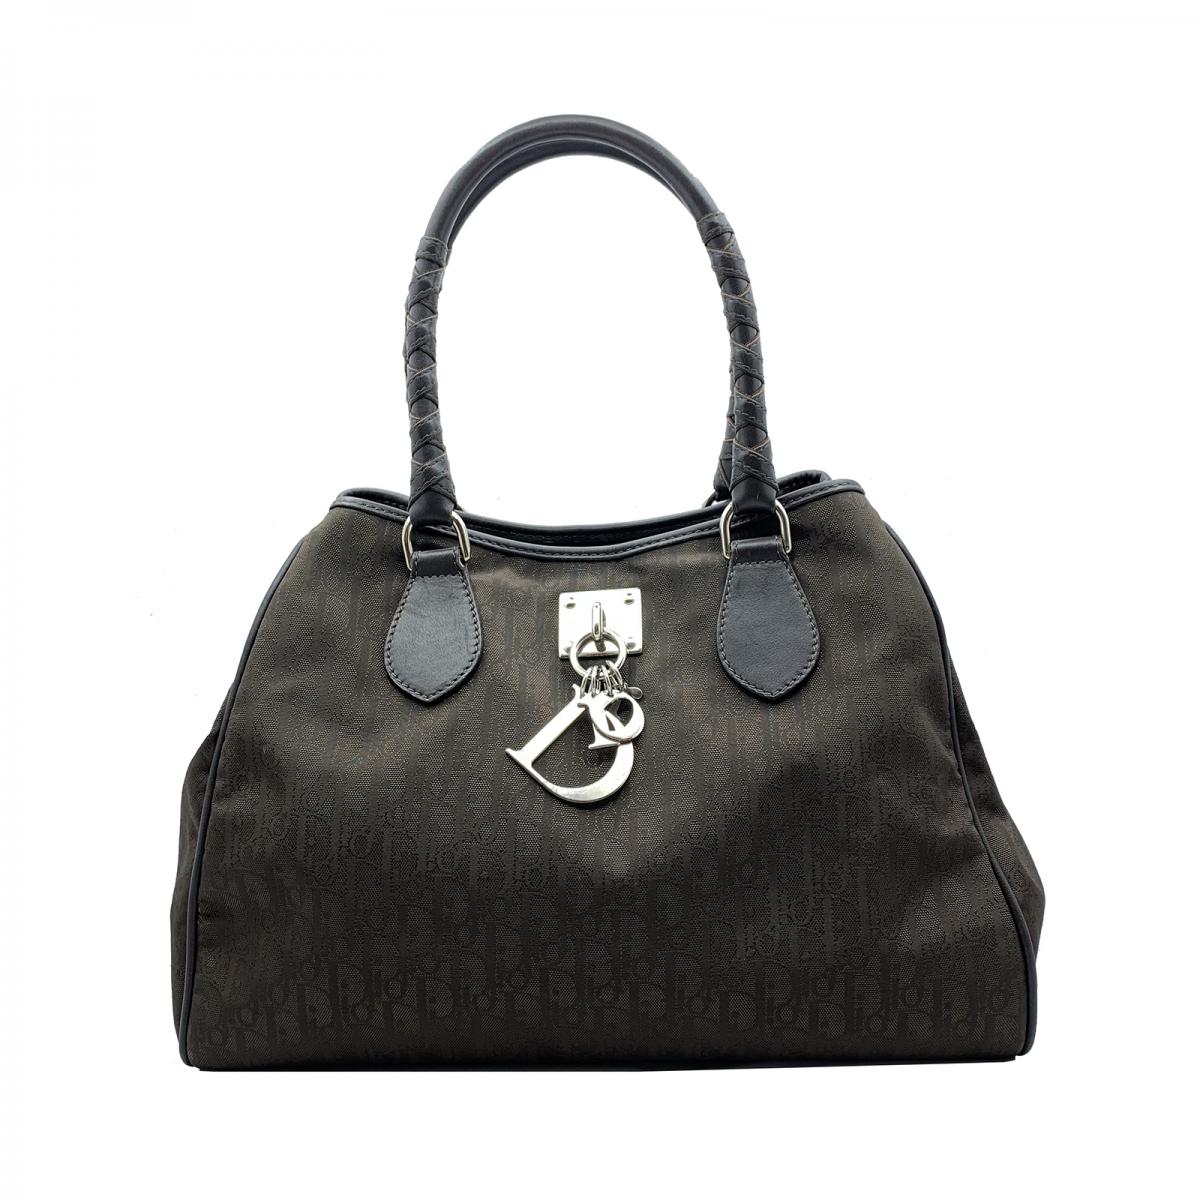 Lovely Diorissimo Charm Tote